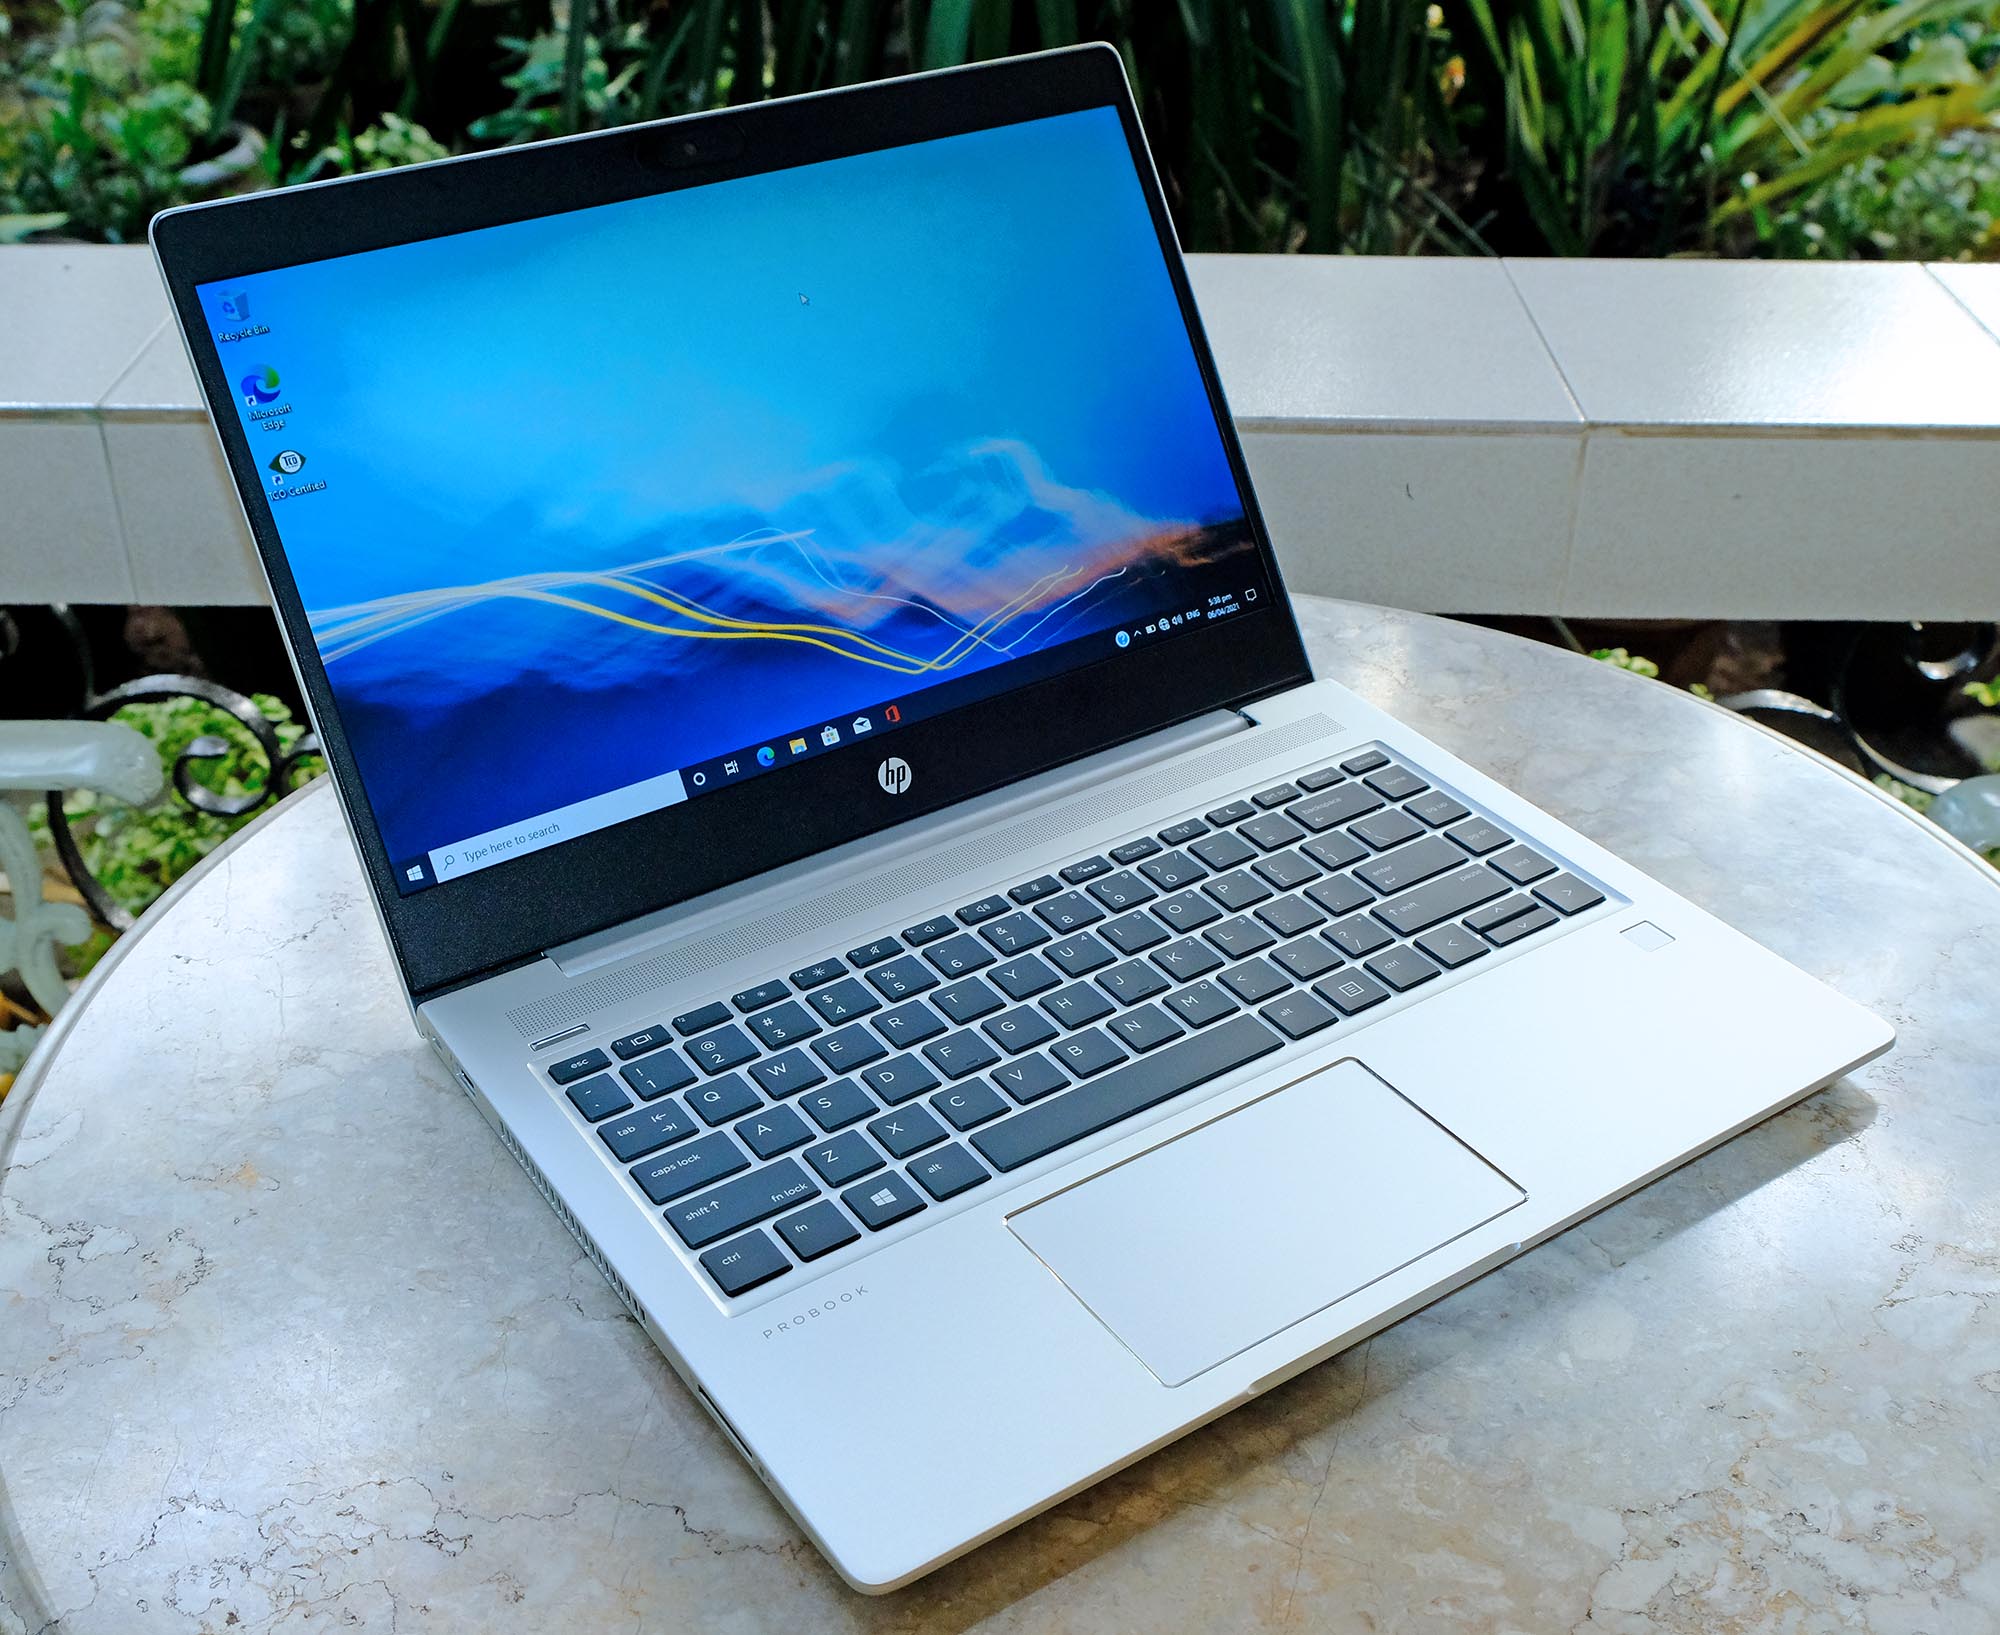 Review HP ProBook 445 G7 Notebook PC Features, Photos, Full